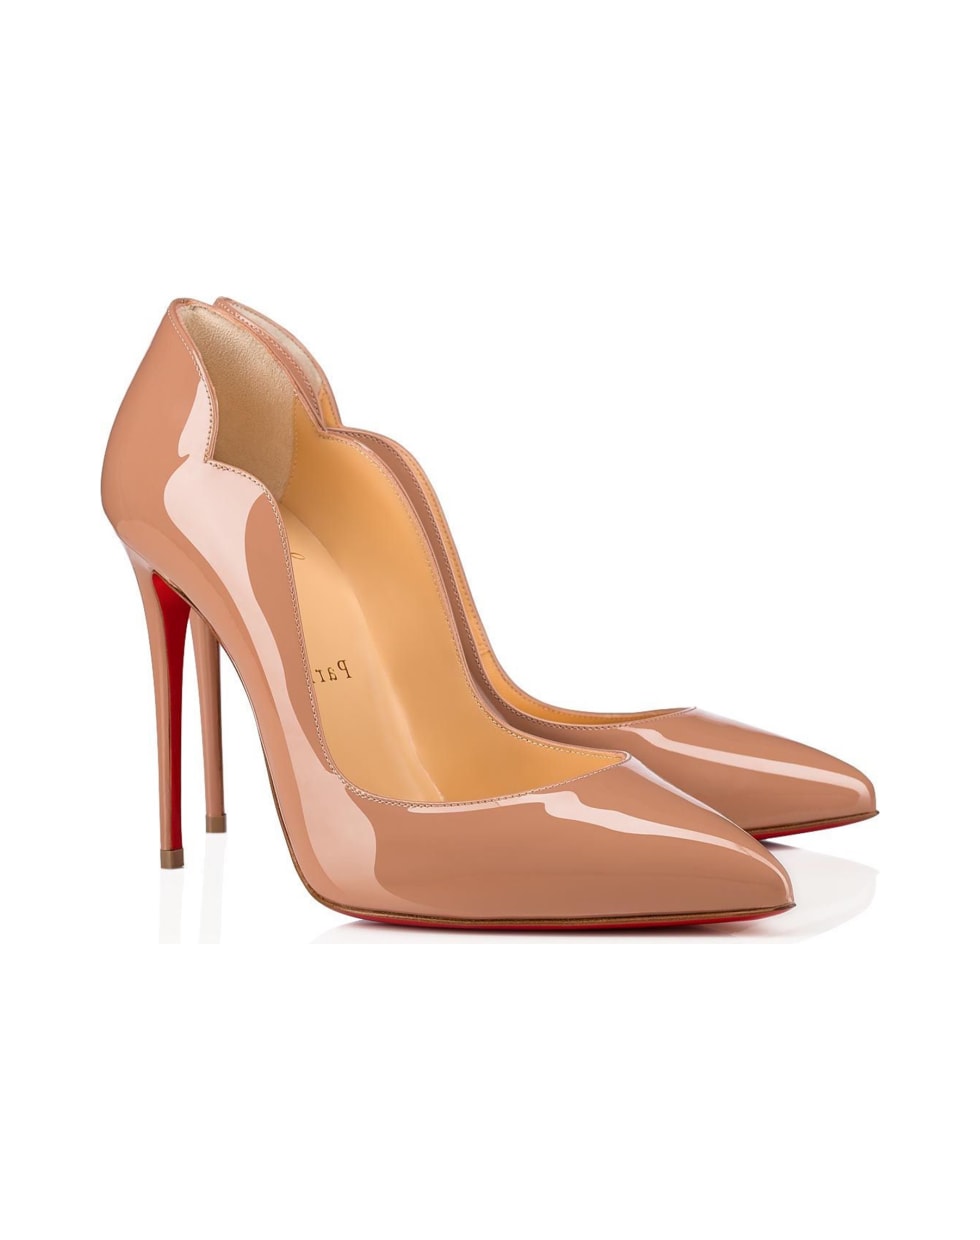 Christian Louboutin Hot Chic 100 Nude Patent Leather Pumps - NUDE